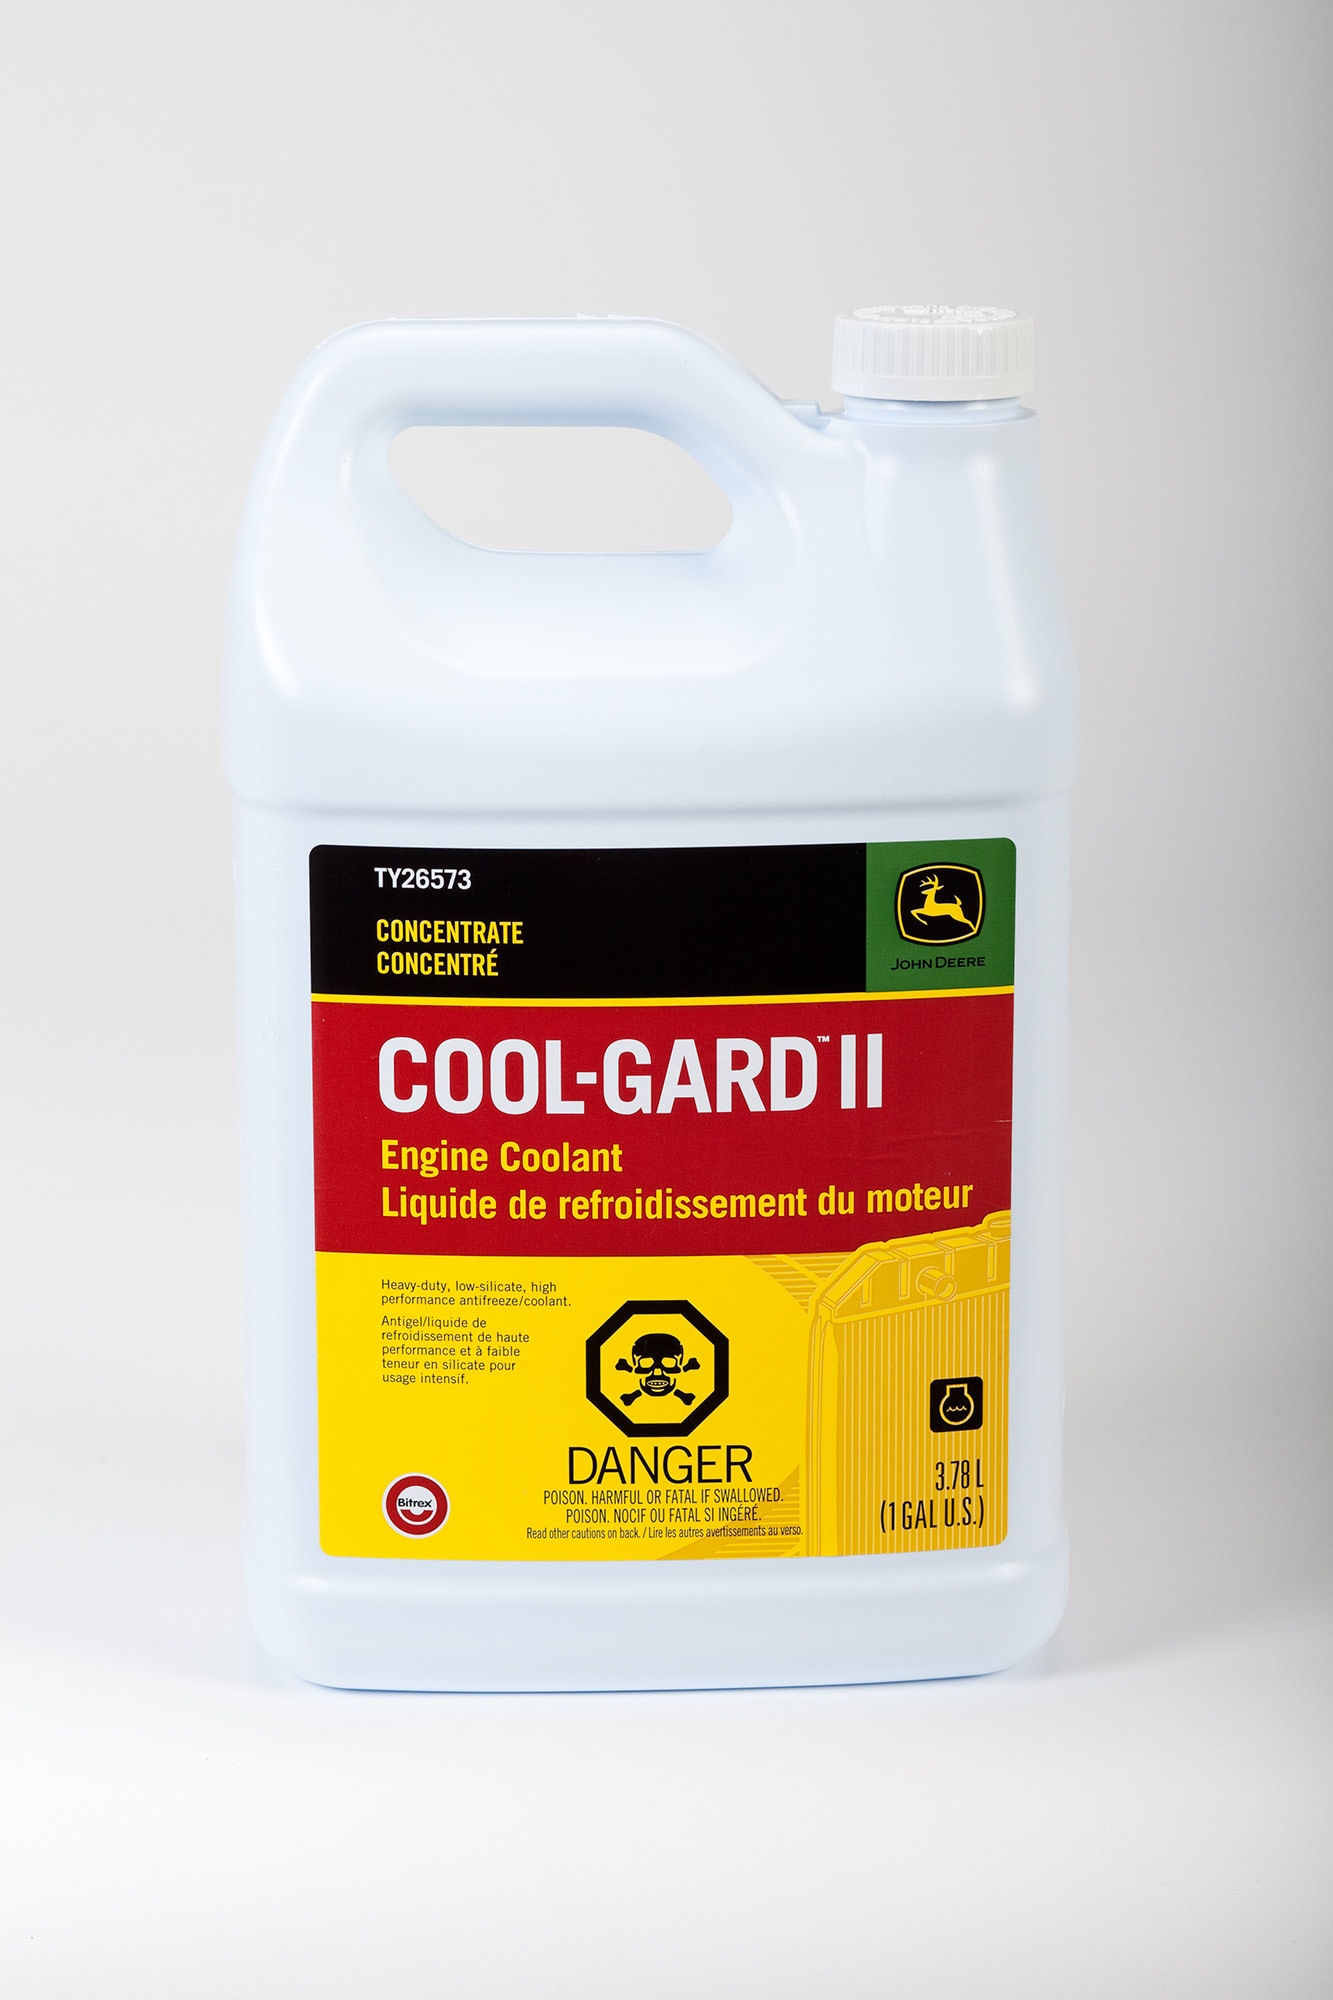 Cool-Gard II Concentrate